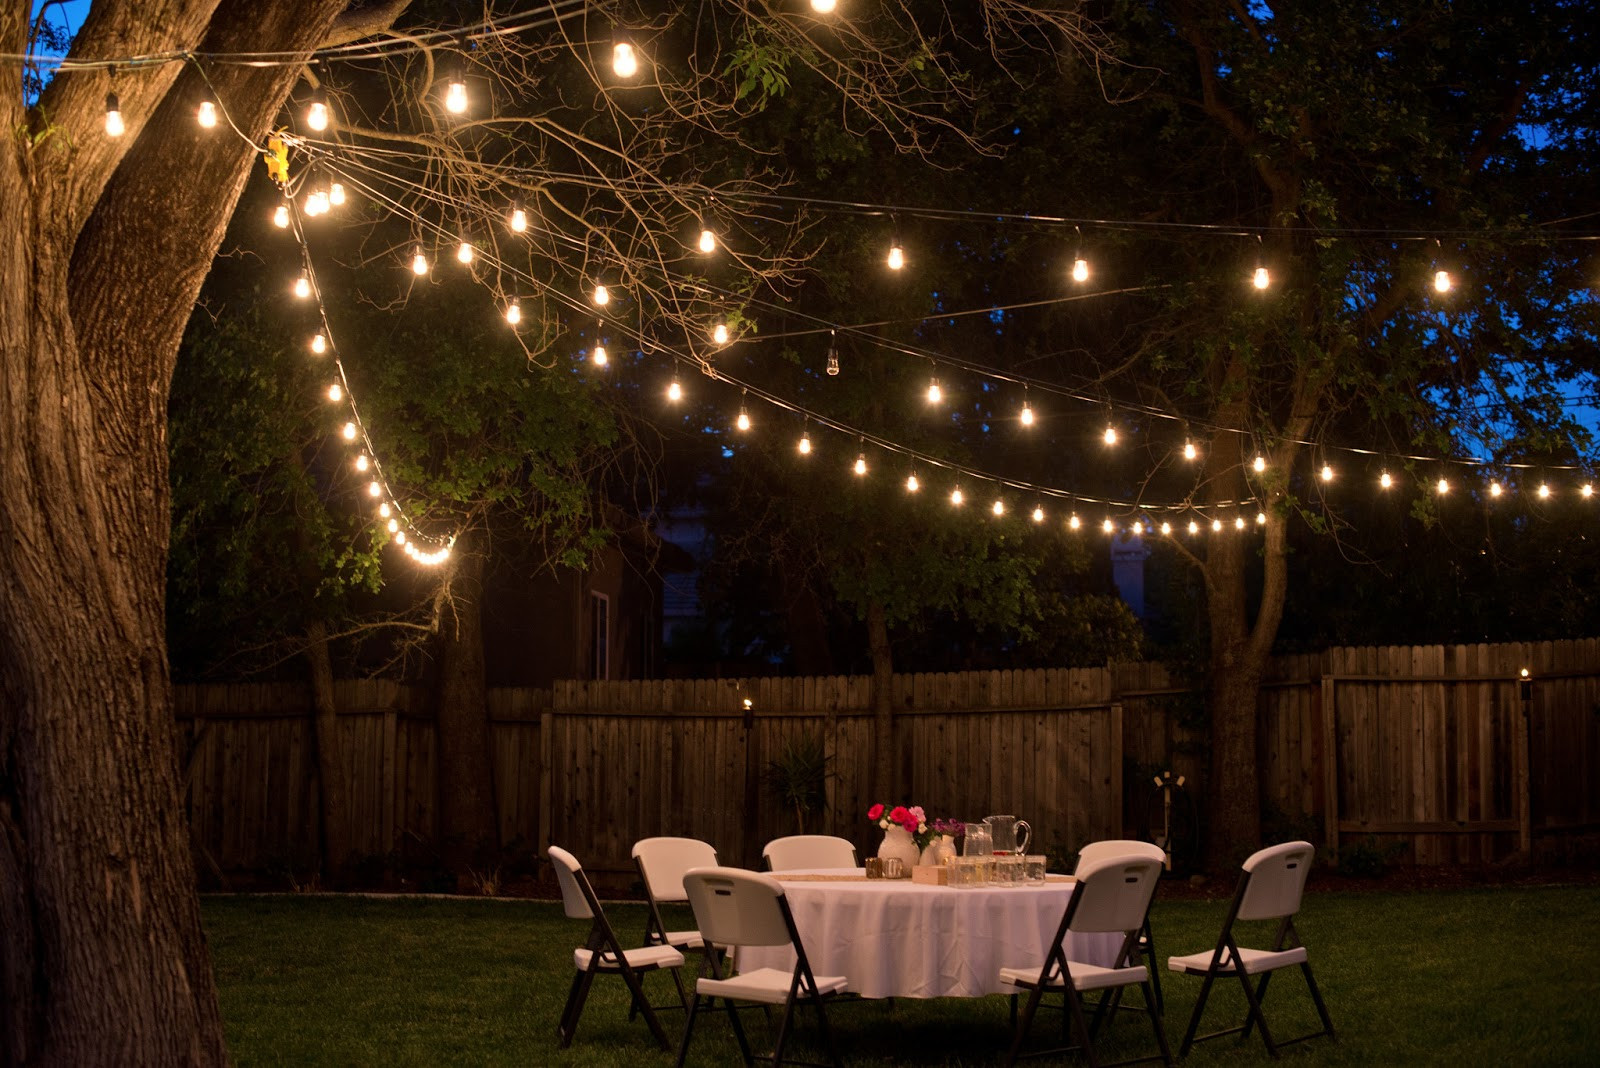 Outdoor Lighting Ideas For Backyard Party
 Domestic Fashionista Backyard Anniversary Dinner Party